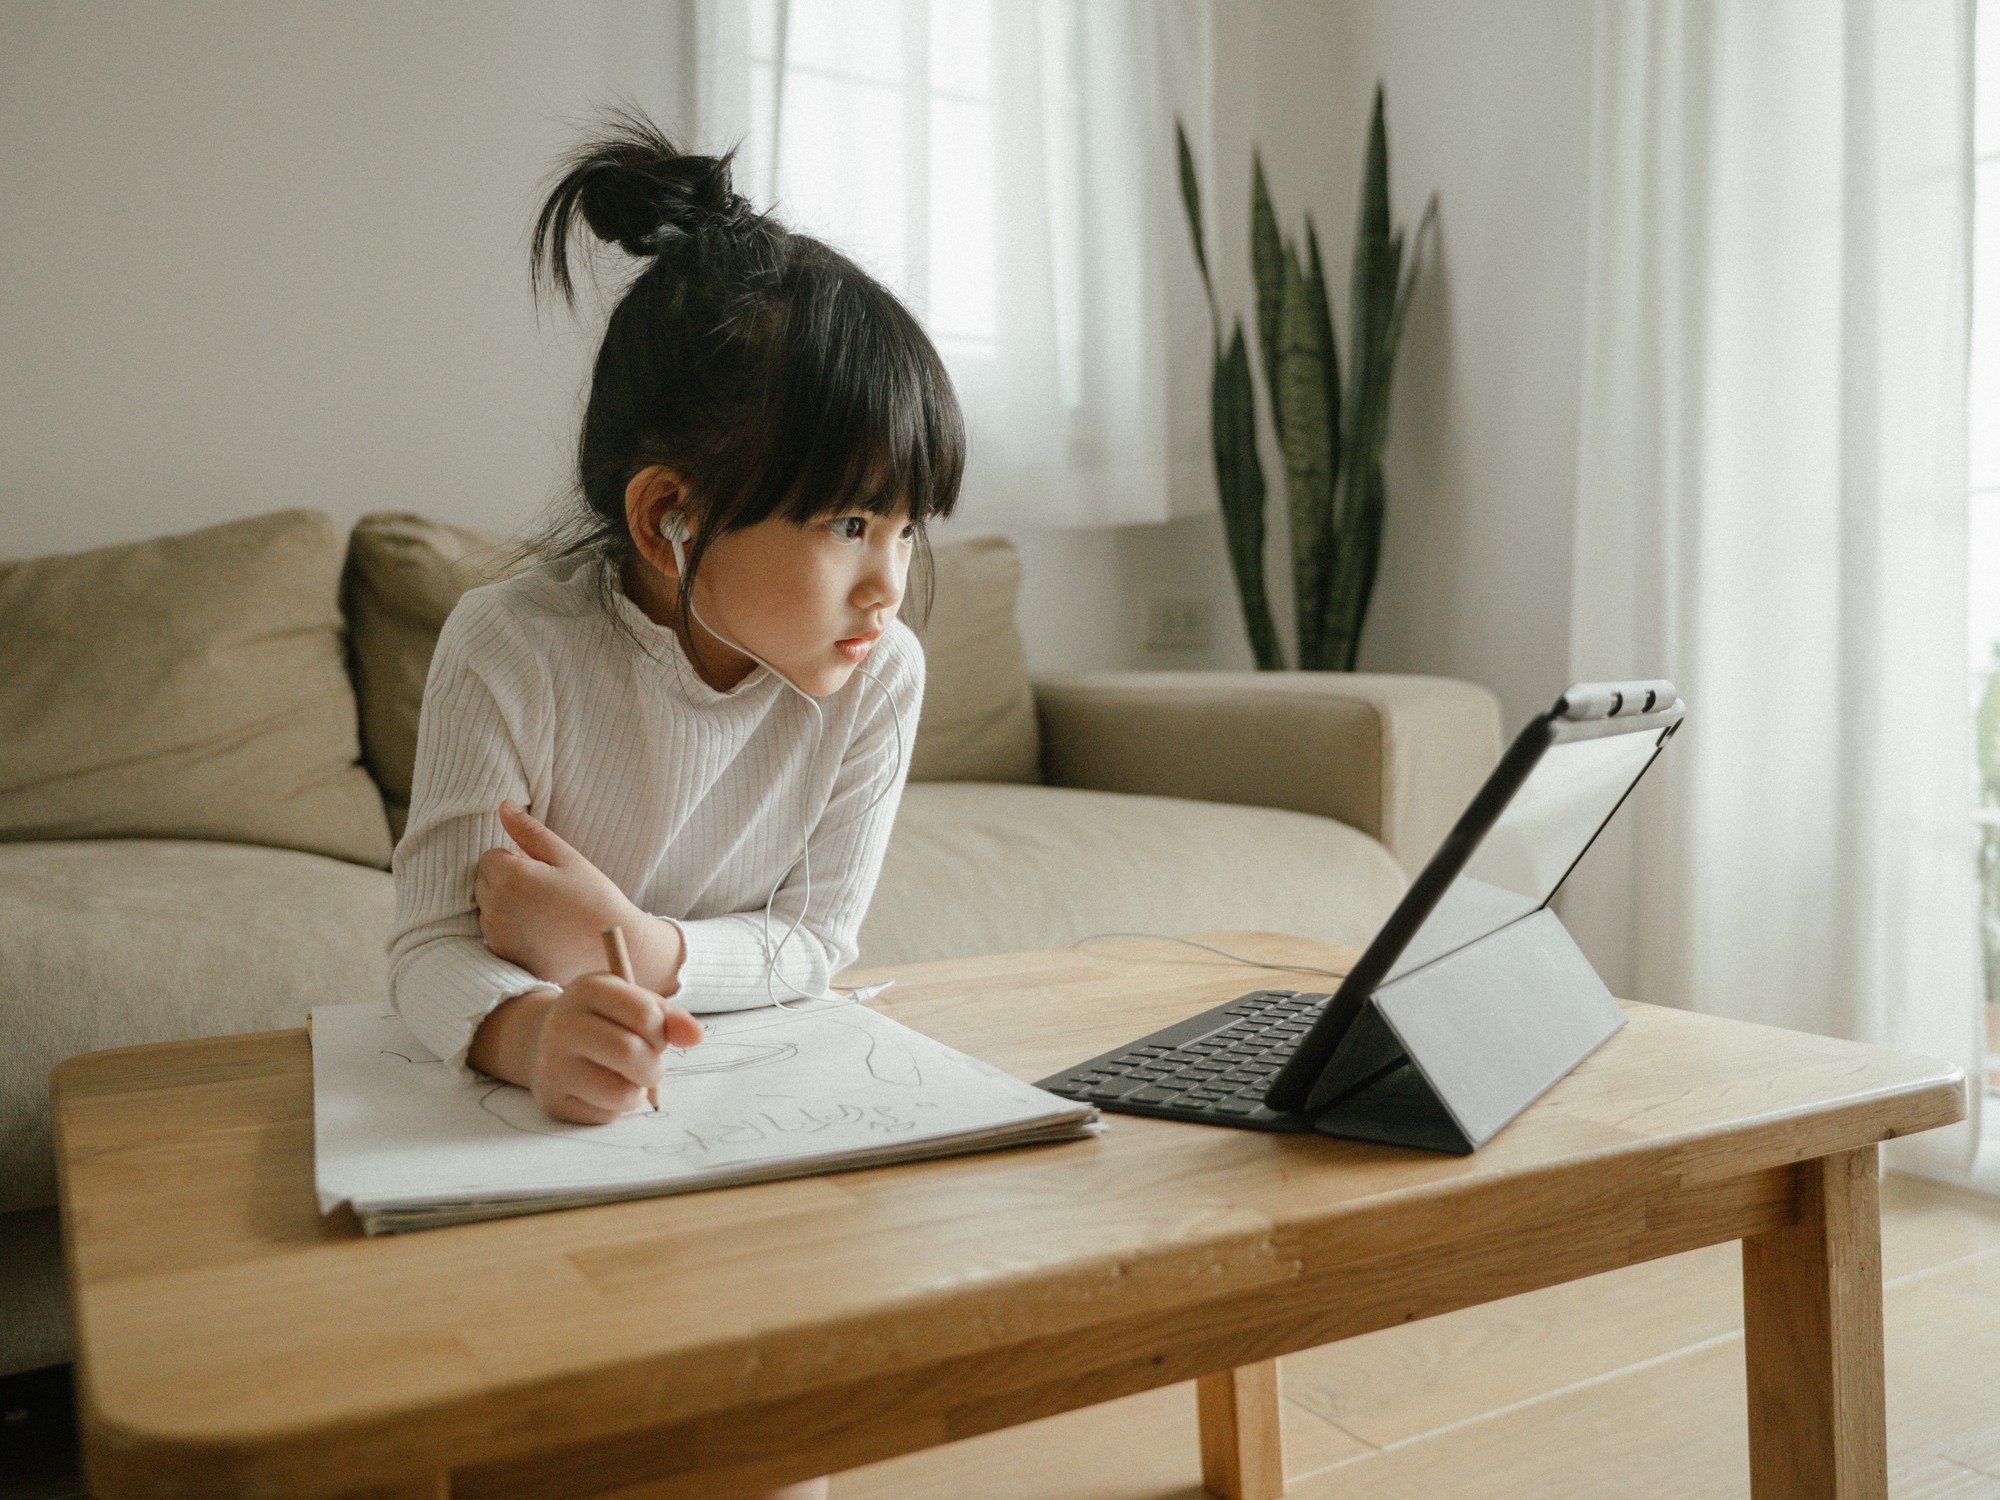 Young girl sitting at a table, watching something on her tablet while writing on a piece of paper with headphones in.